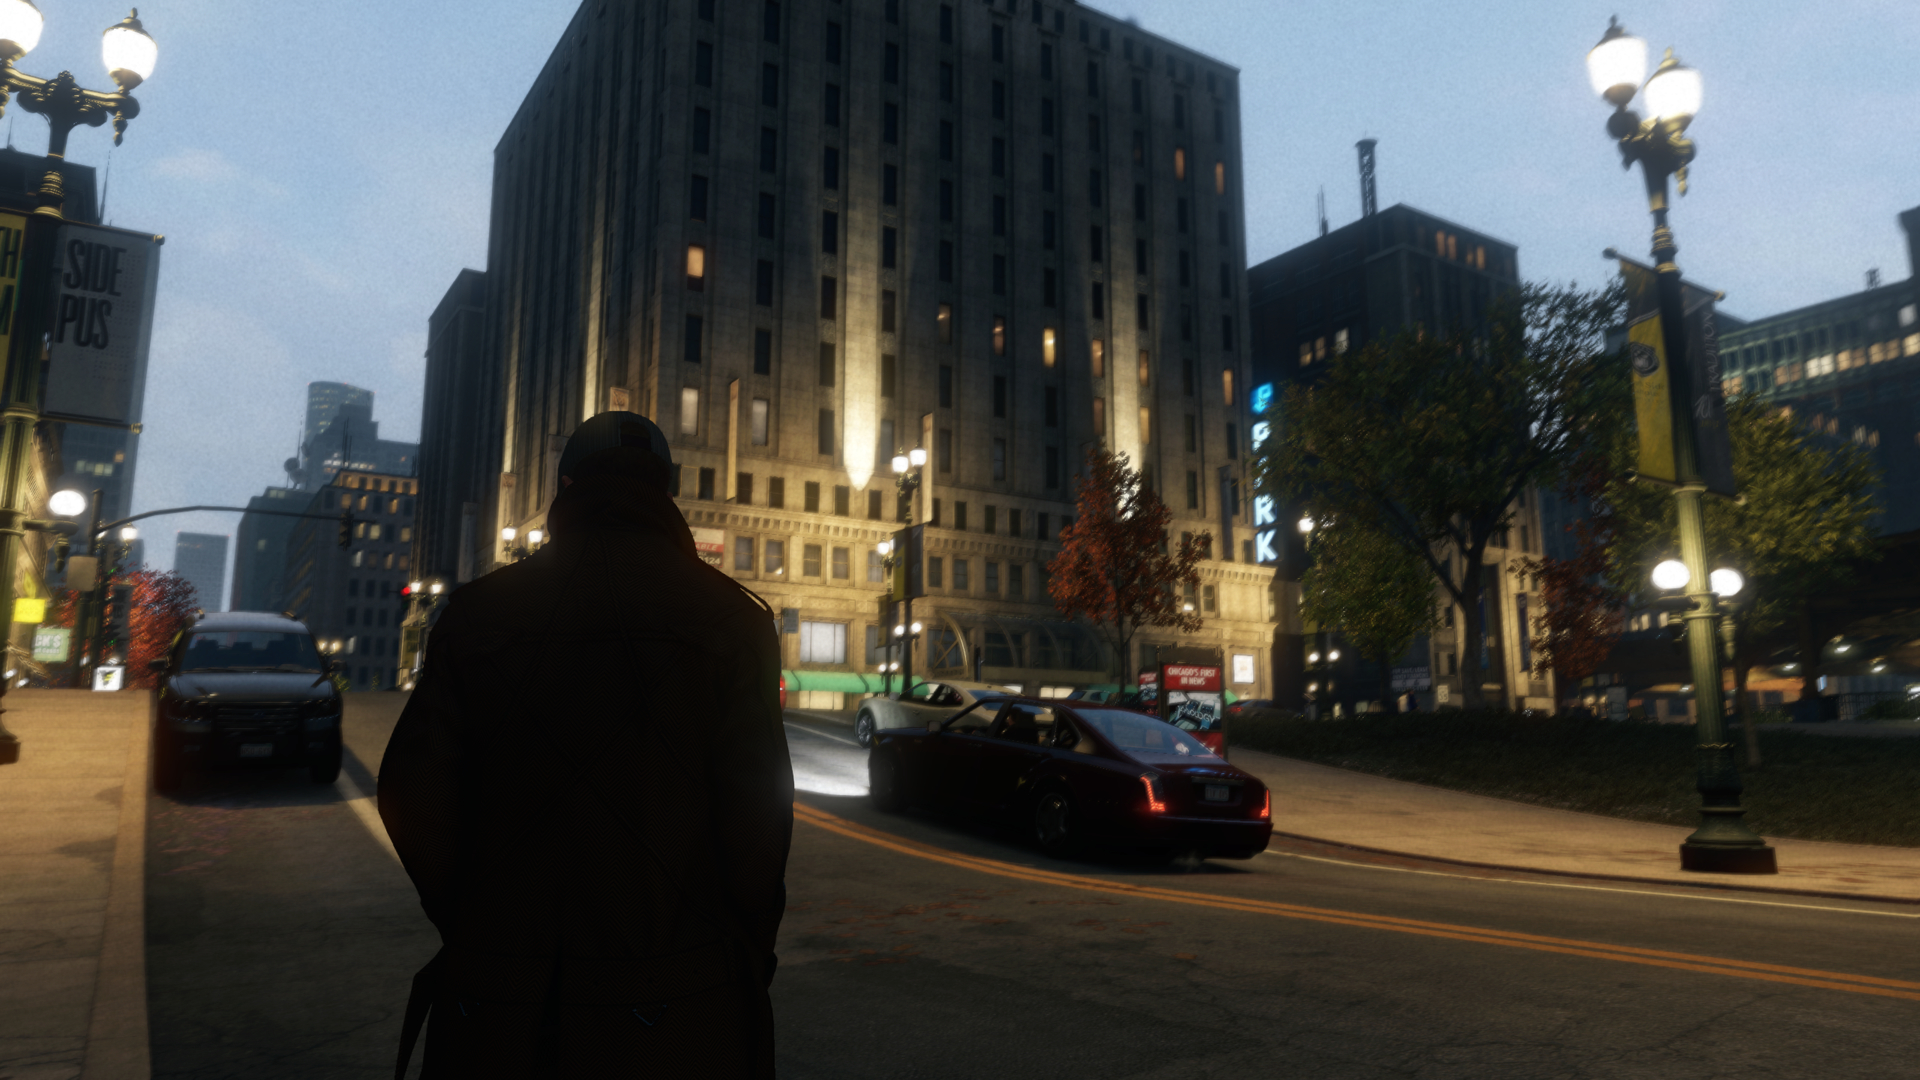 watch_dogs_exe_dx11_20140528_175143_1080p_by_confidence_man-d7k3det.jpg